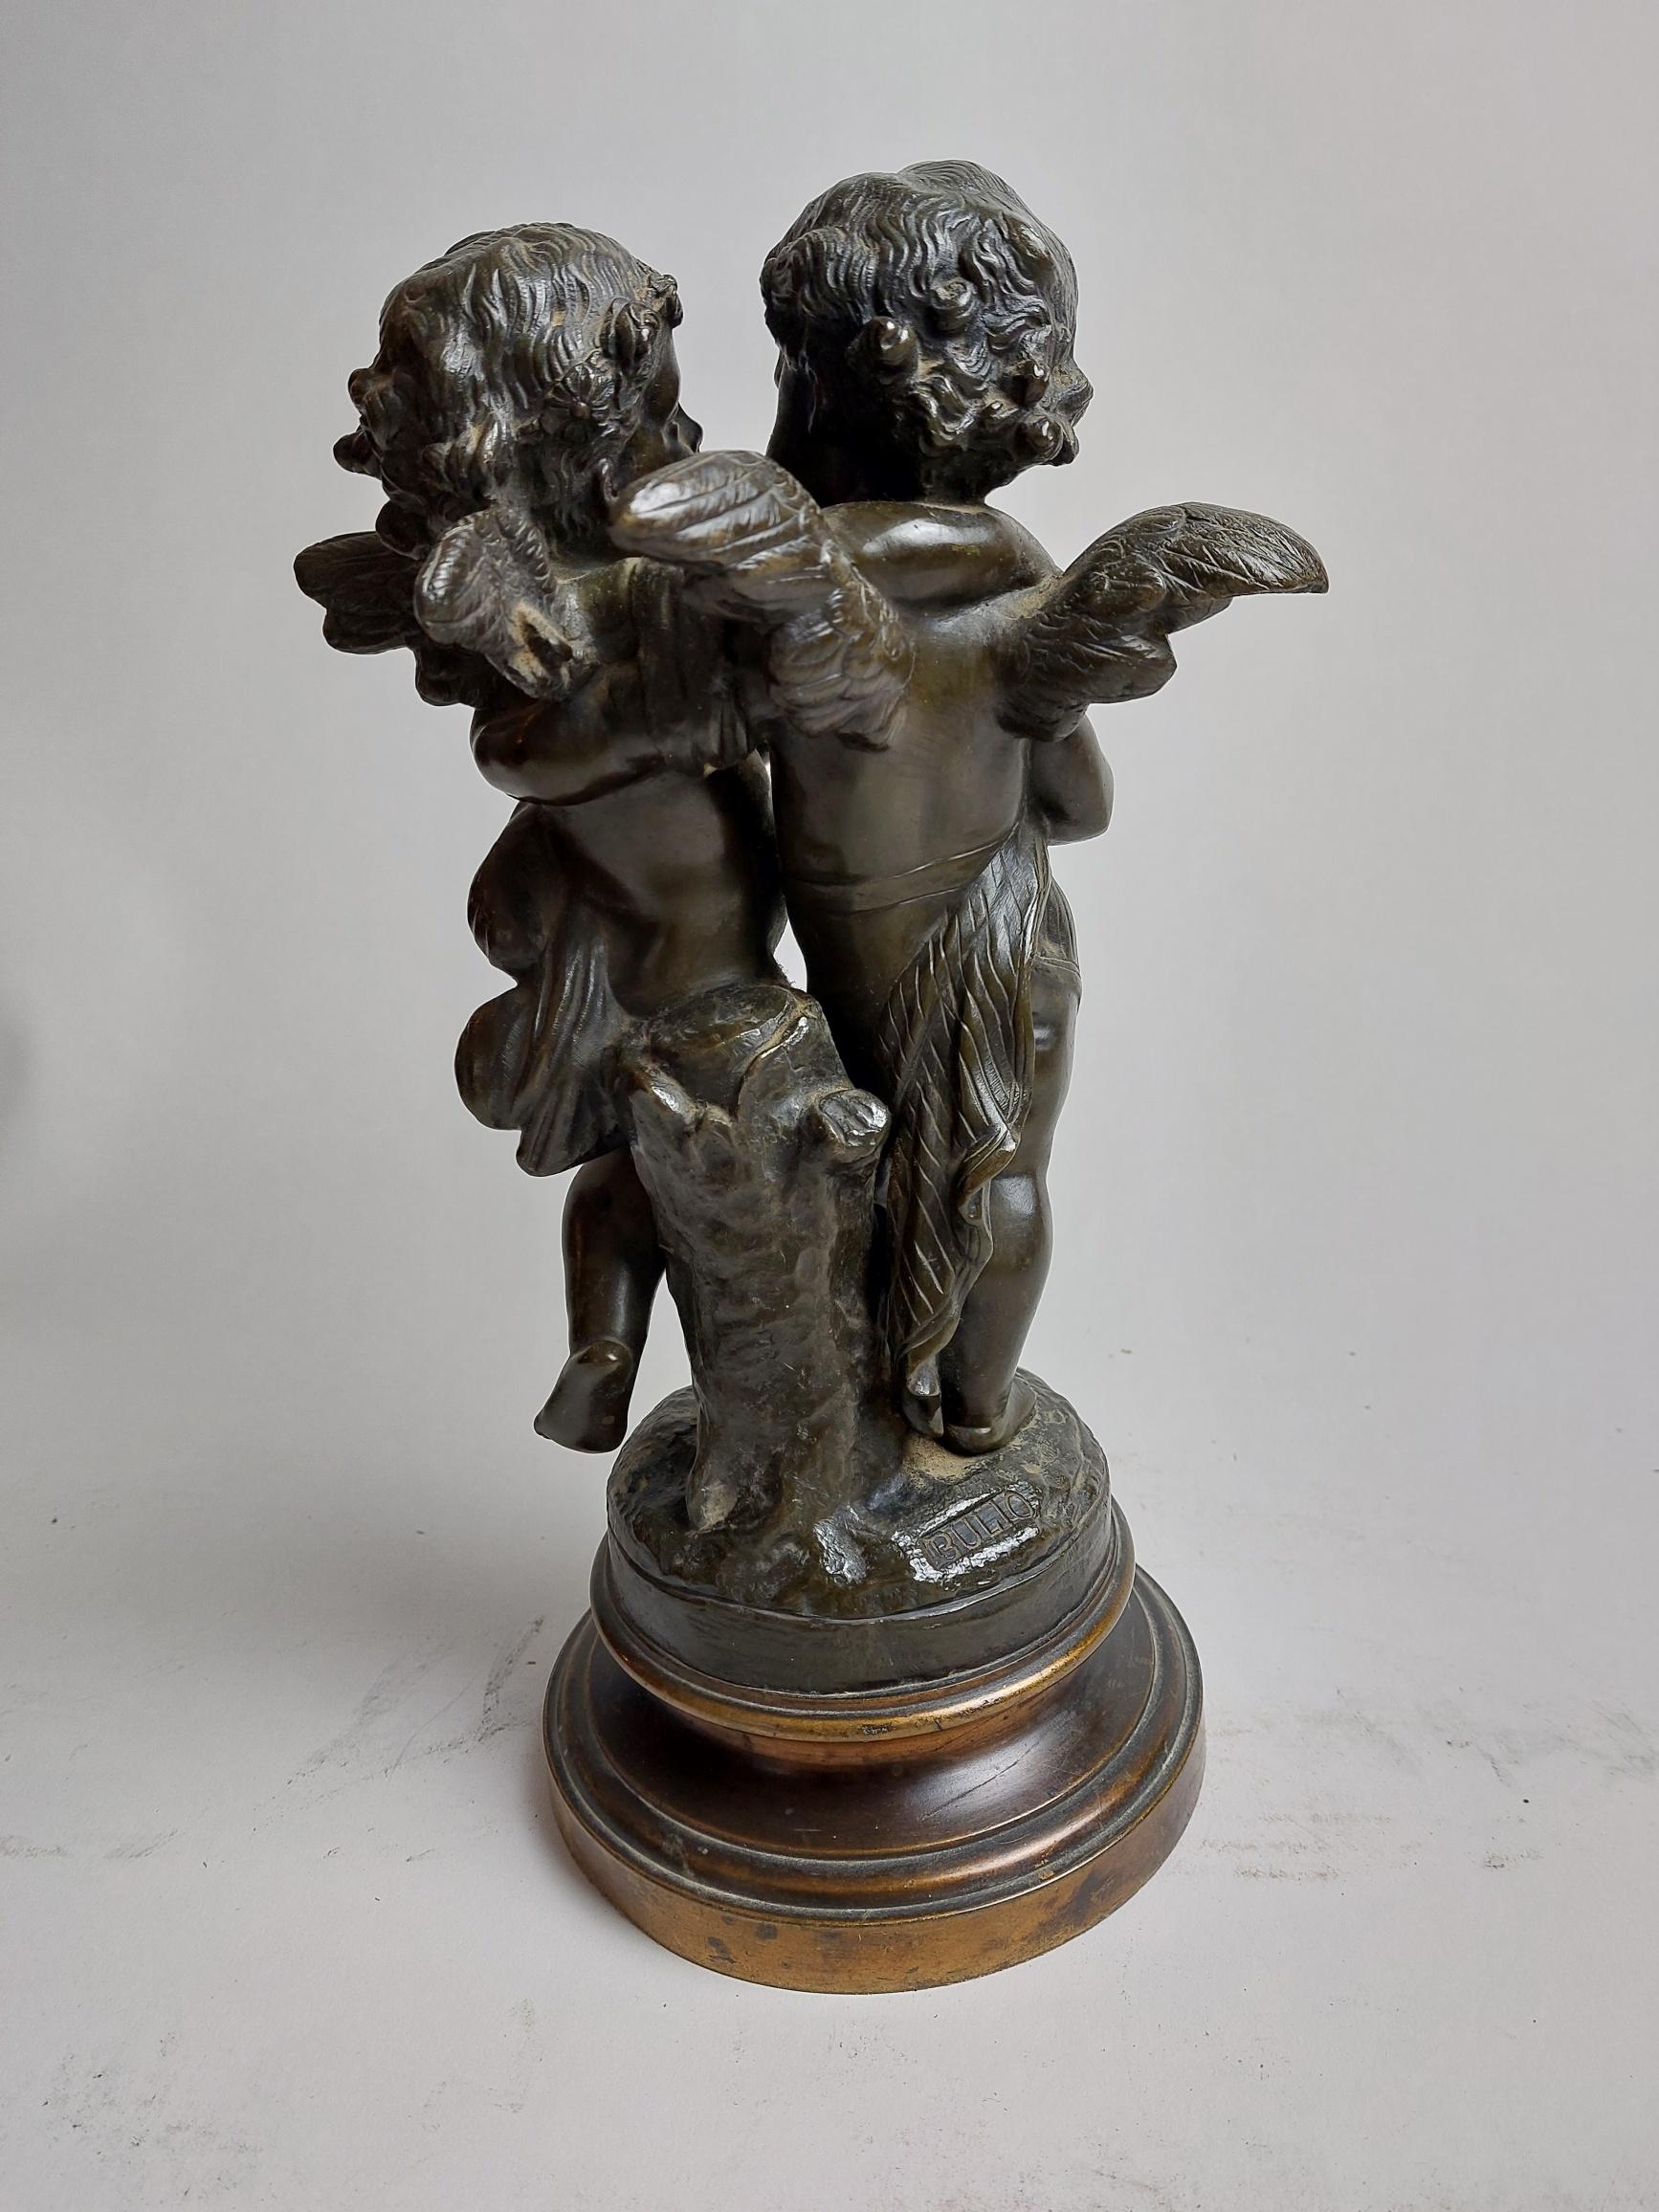 Baroque Revival Charming 19th Century Bronze of Boy and Girl Winged Cherubs Signed Bulio For Sale